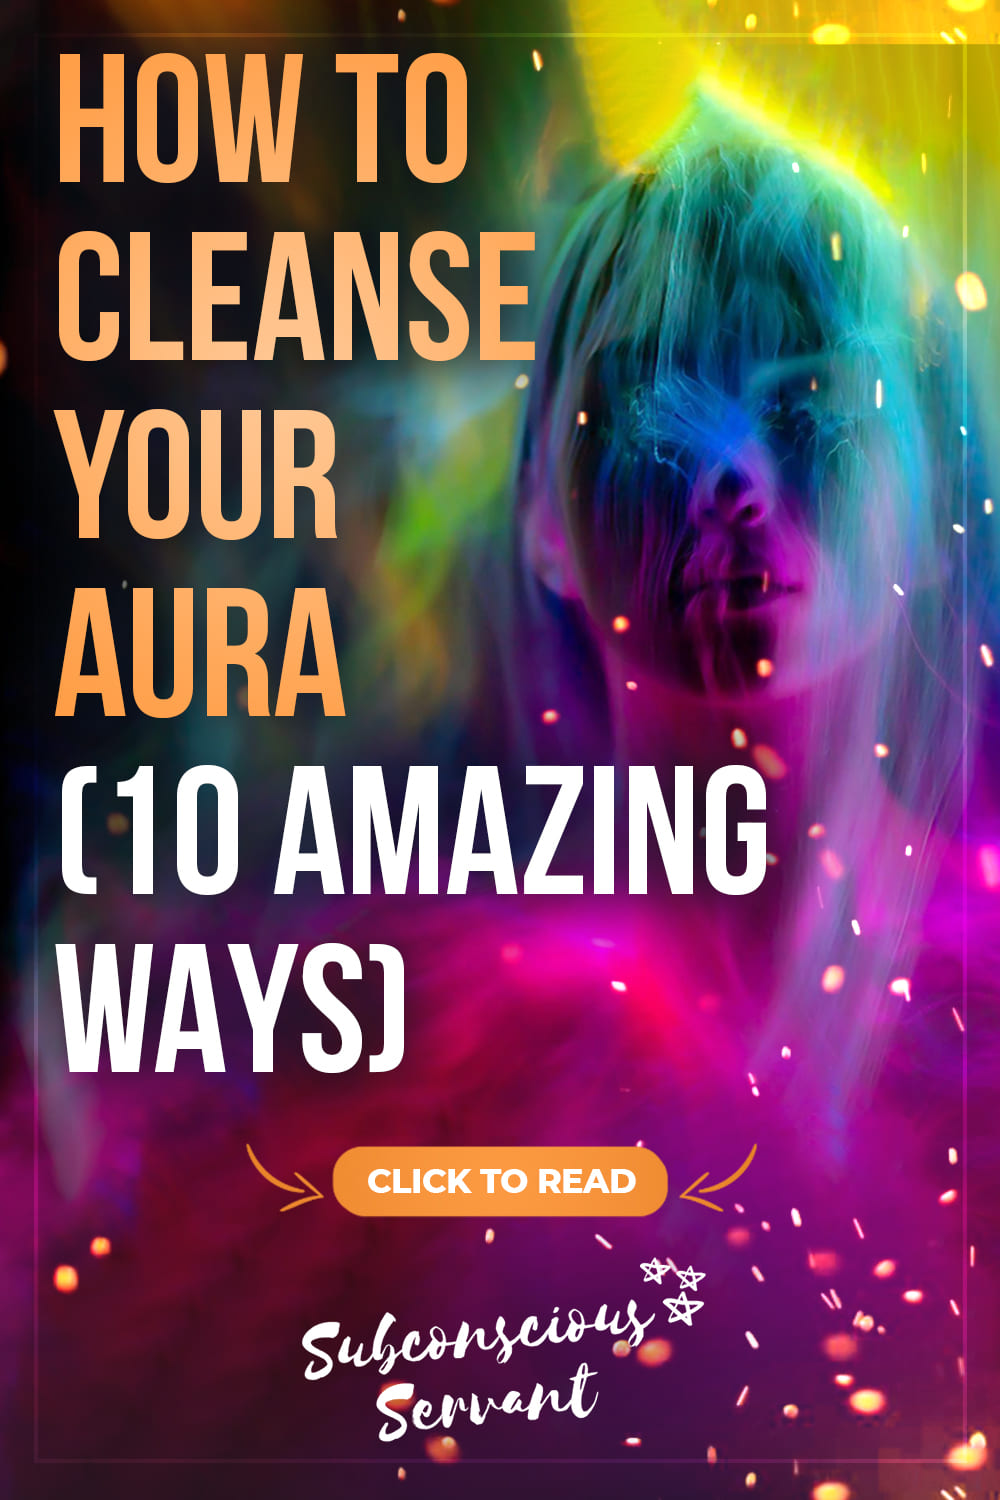 How To Cleanse Your Aura (10 Amazing Ways)